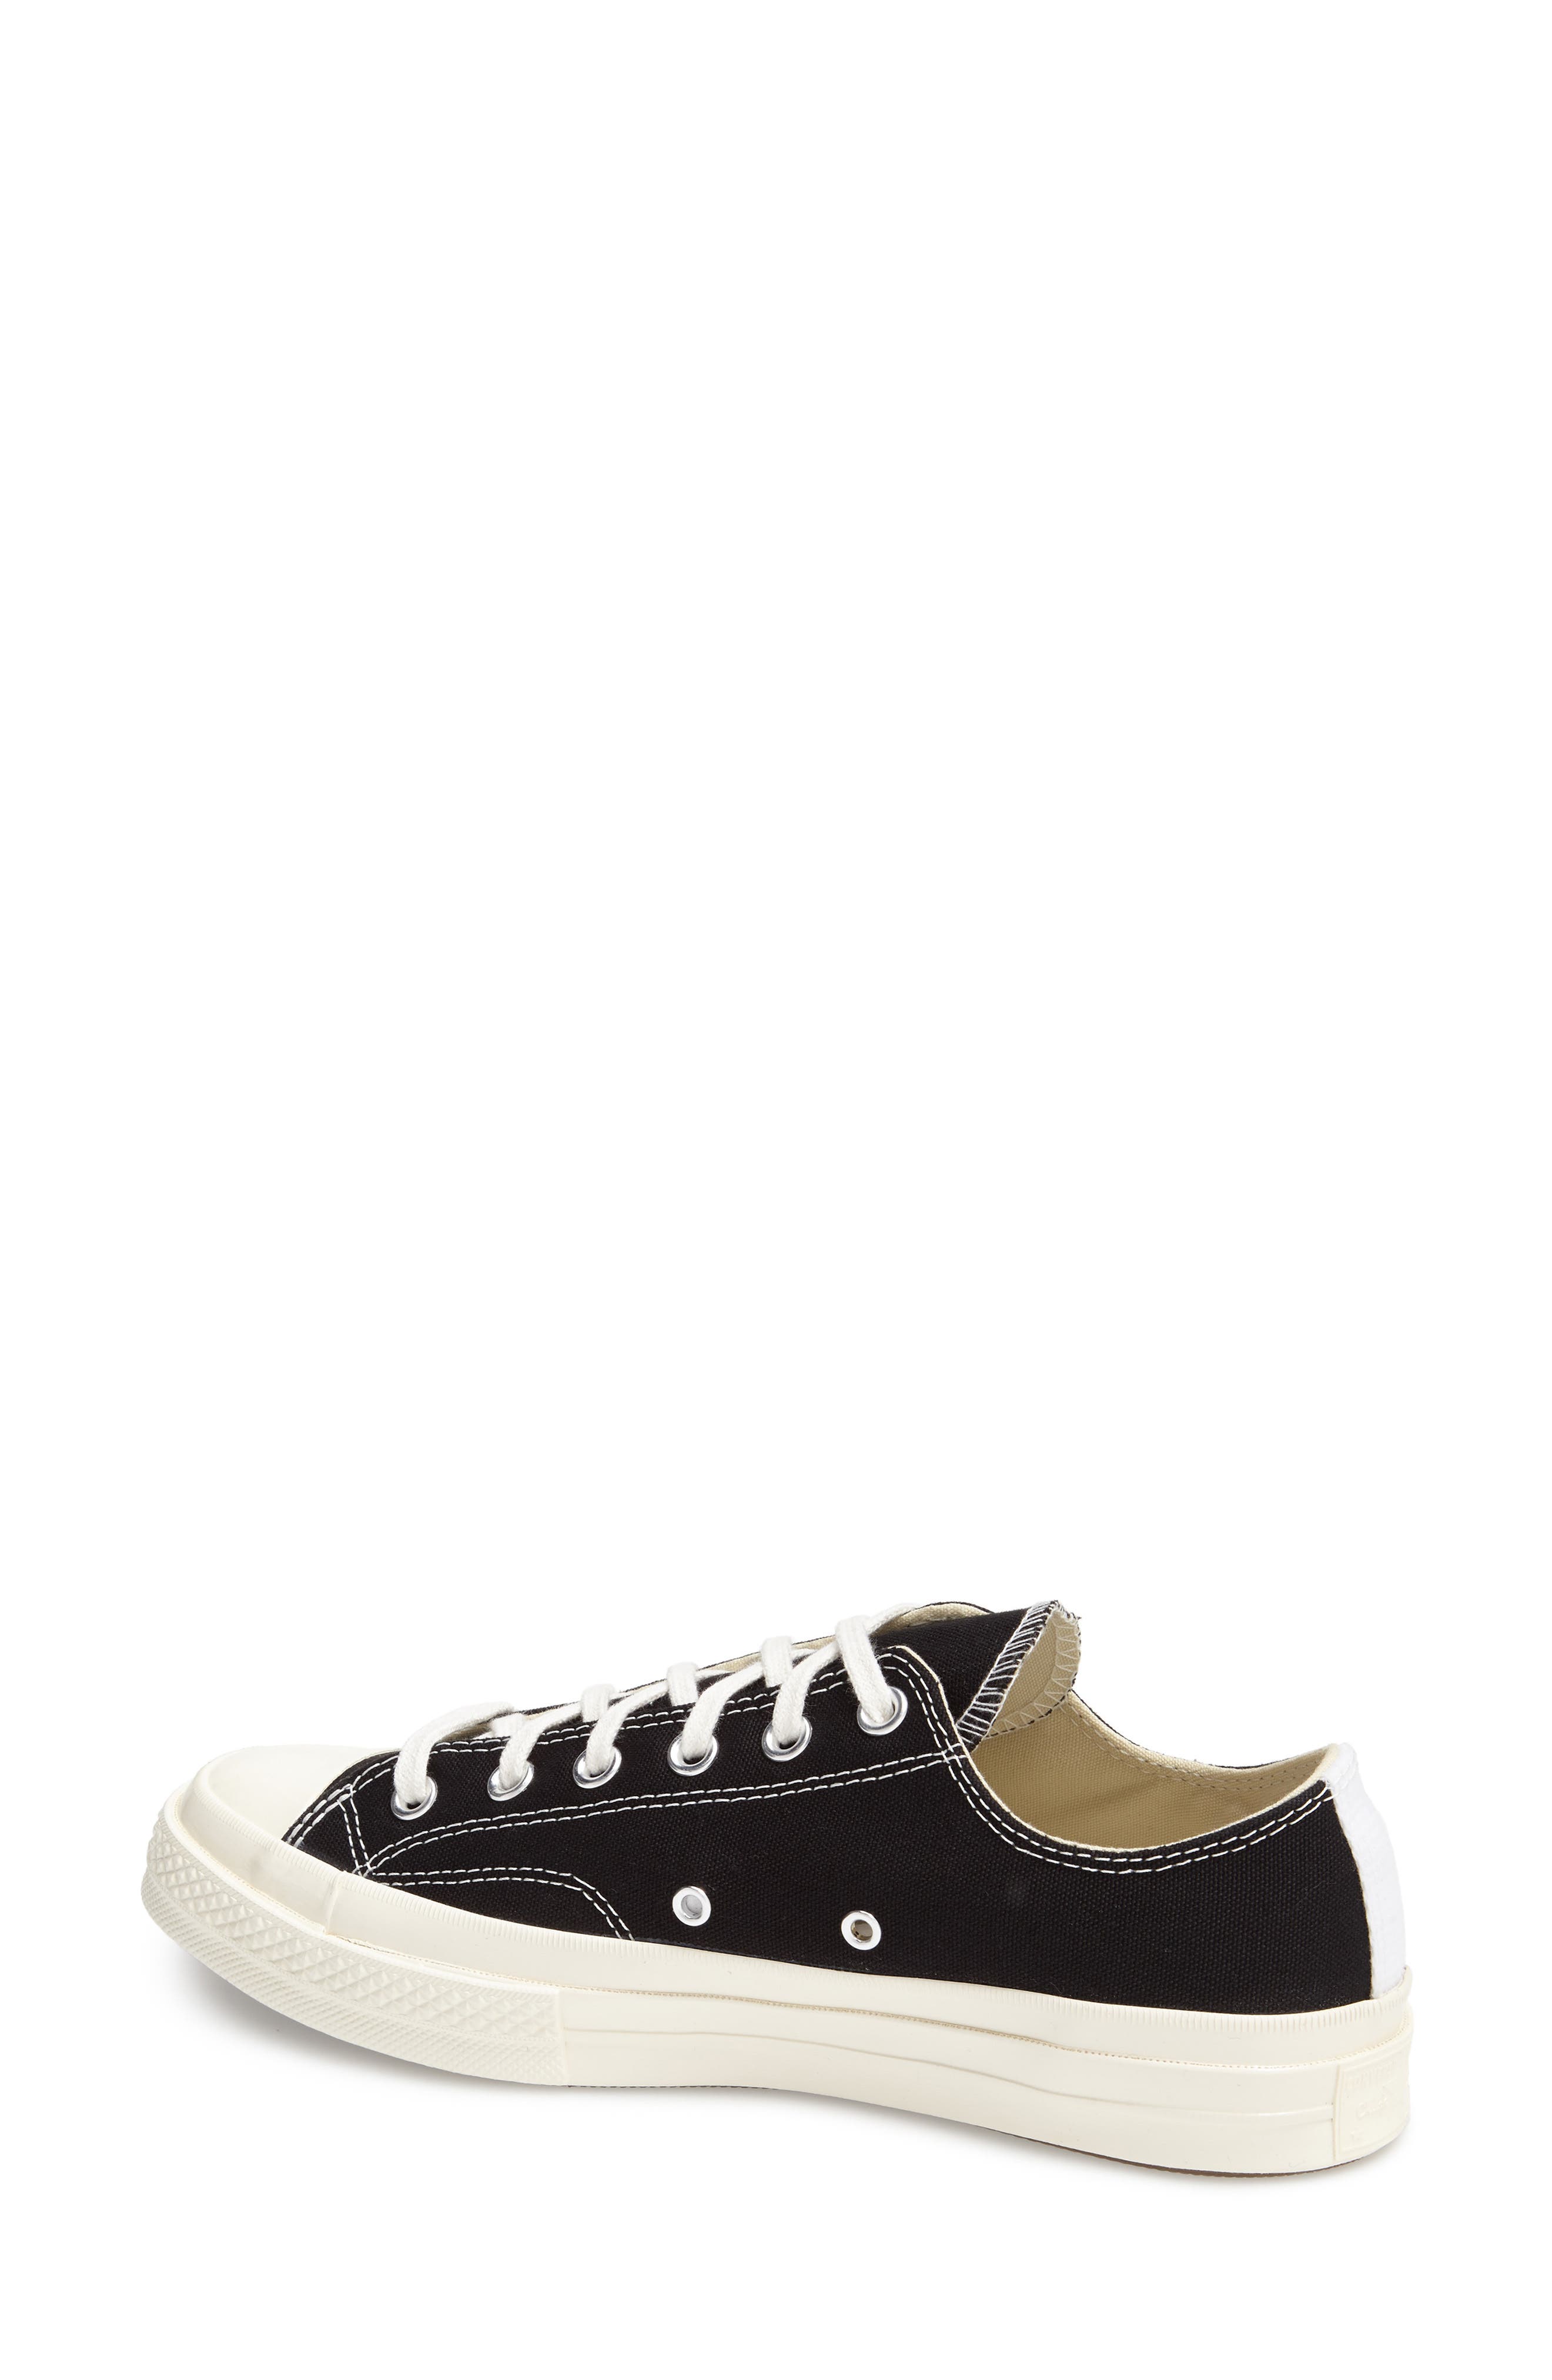 expensive shoes that look like converse